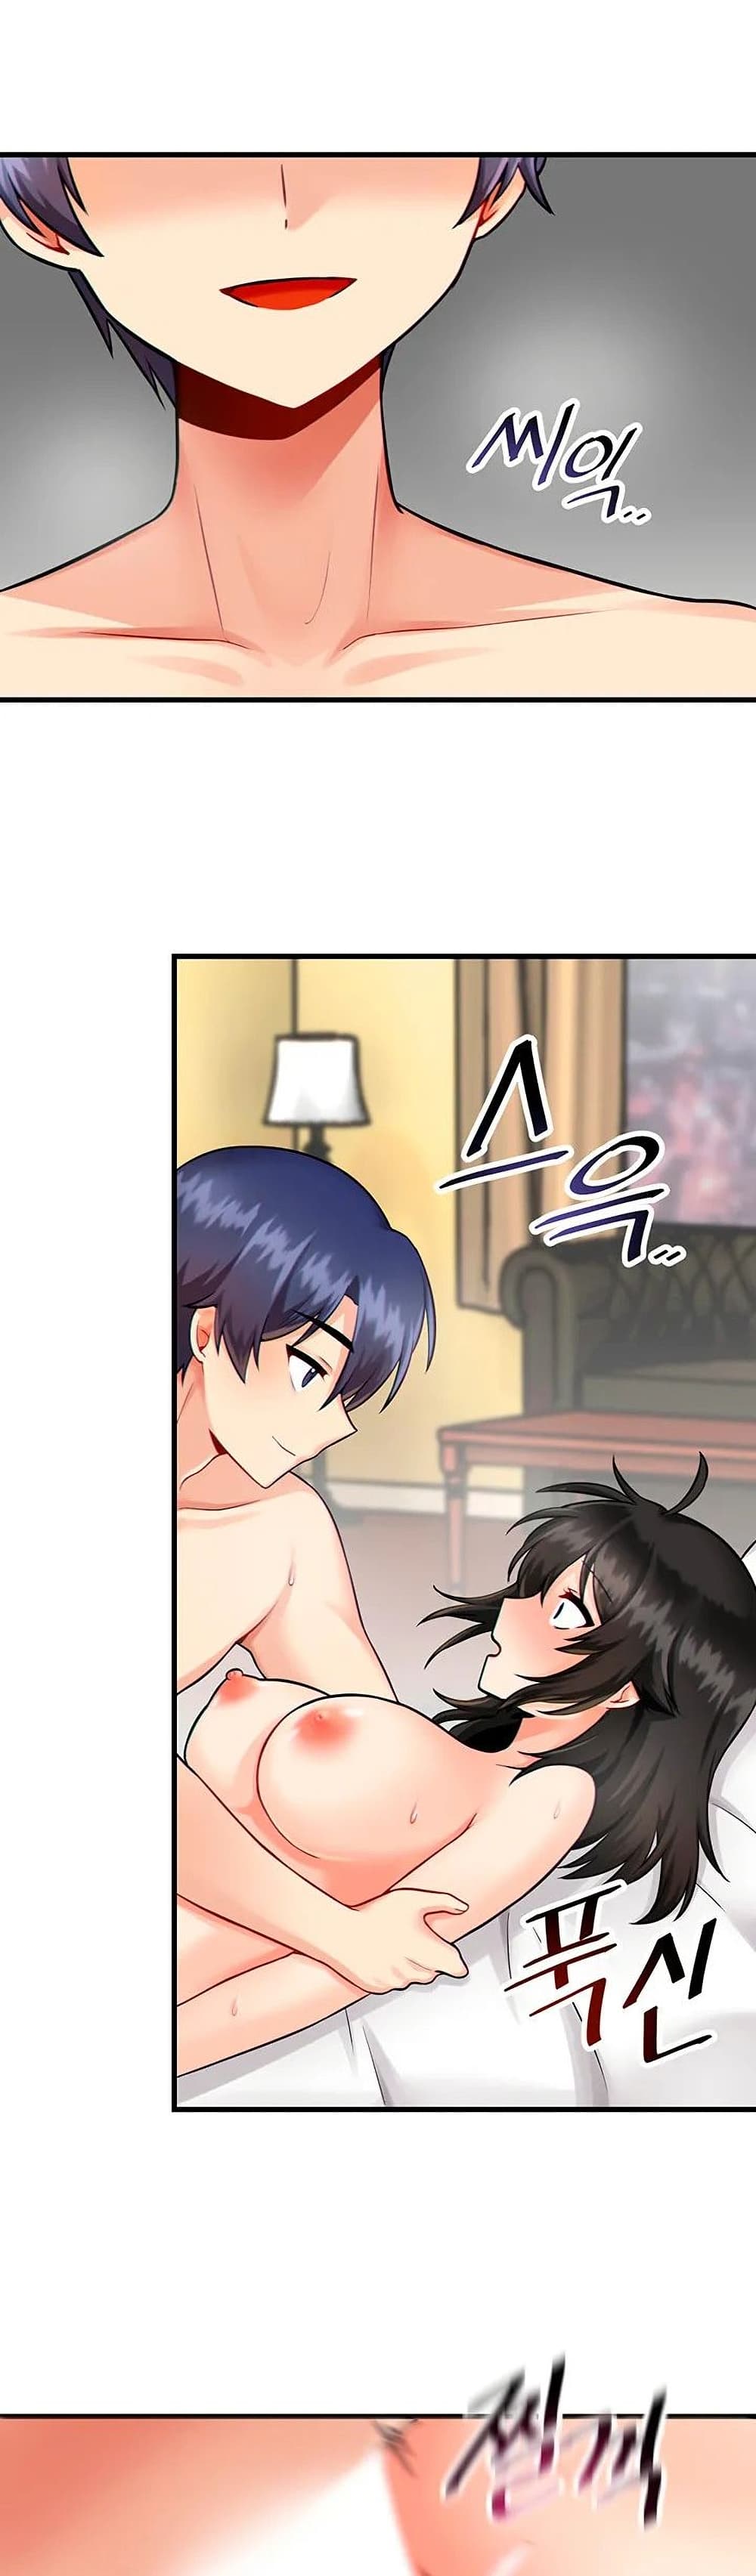 Trapped in the Academy’s Eroge 11-11